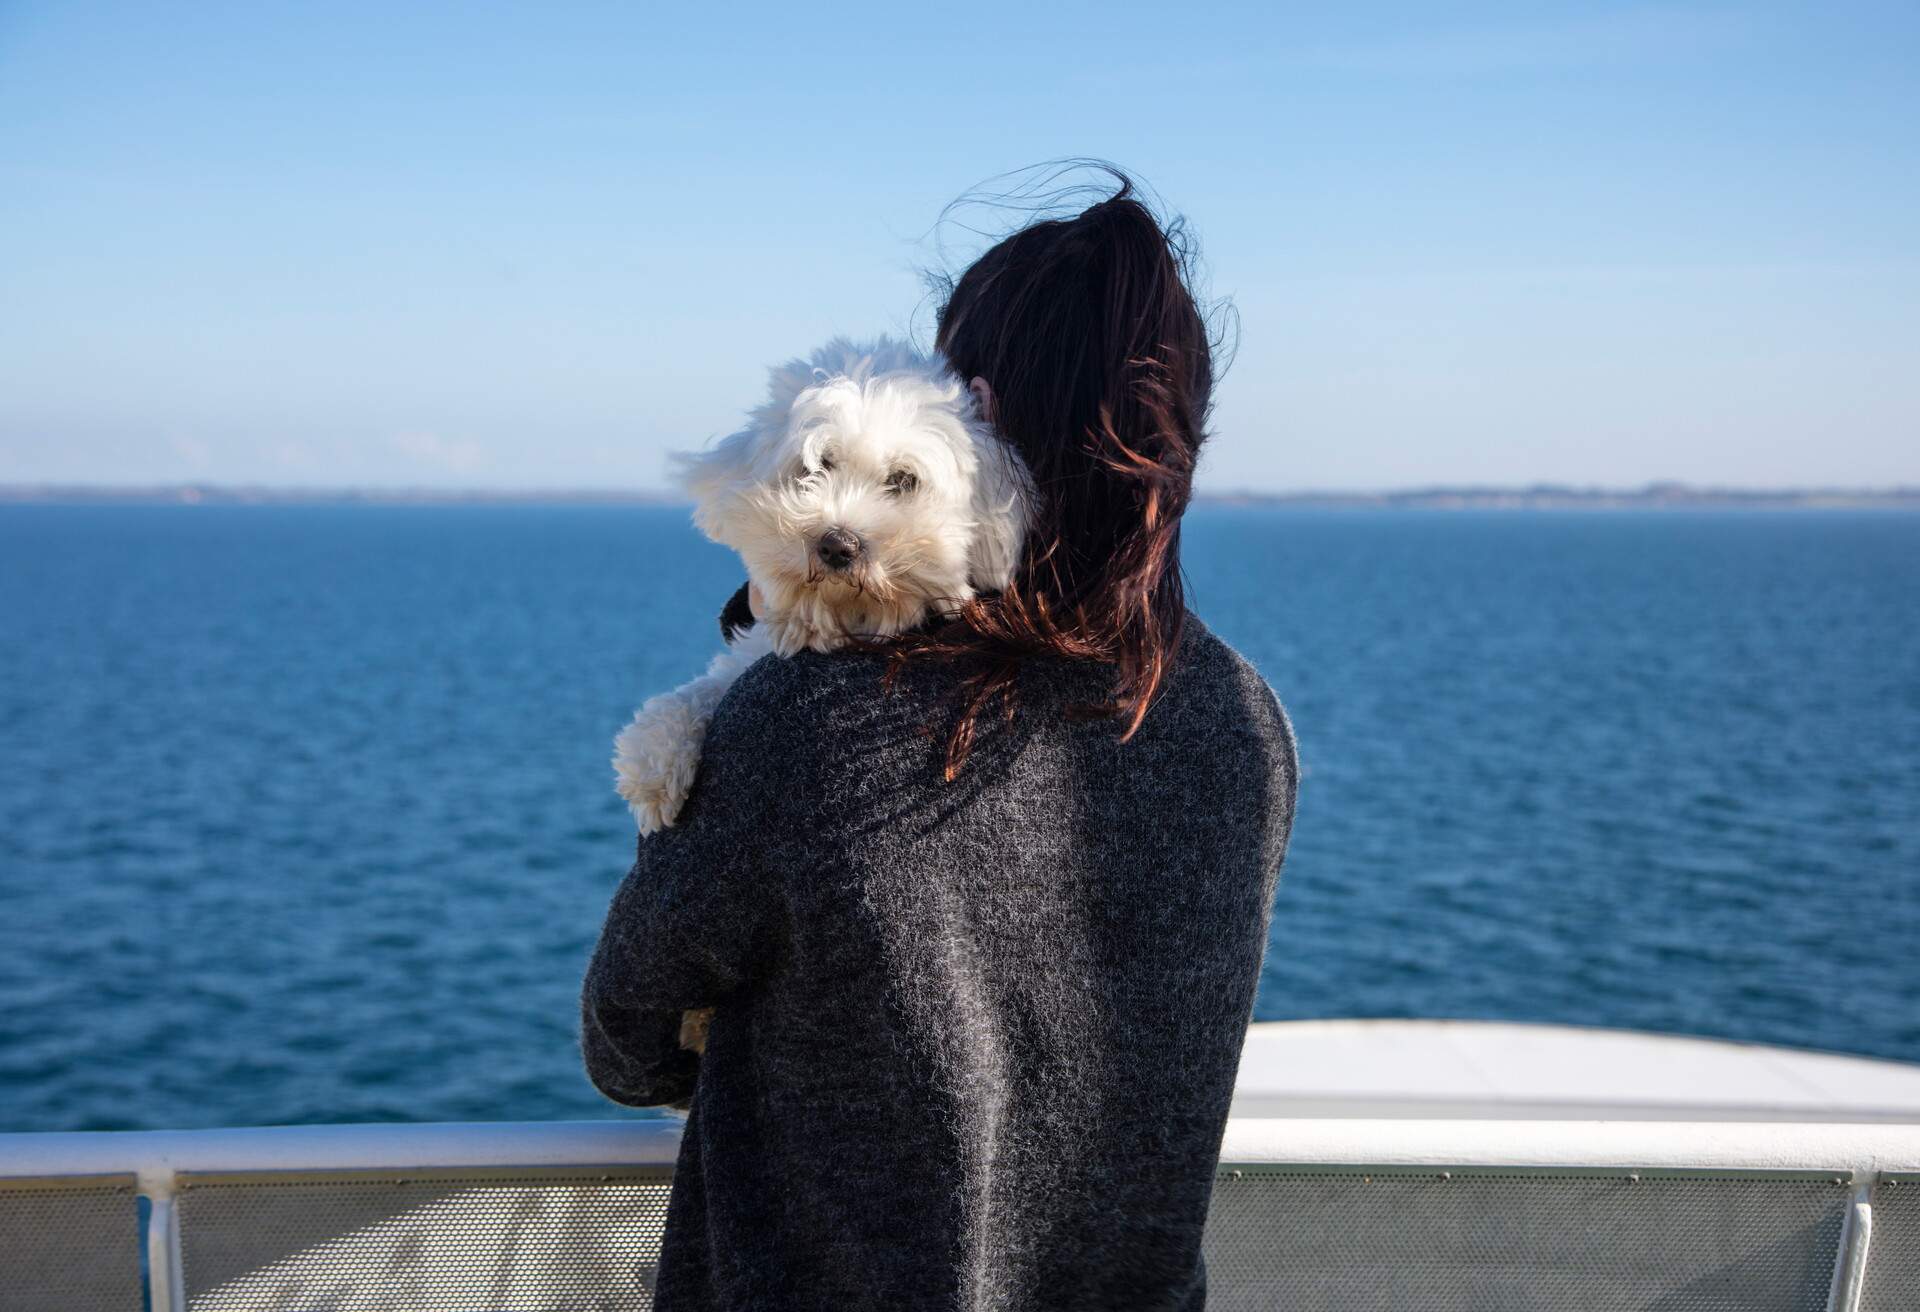 A woman carrying a white dog standing on the deck of a ferry boat, staring out into the sea.